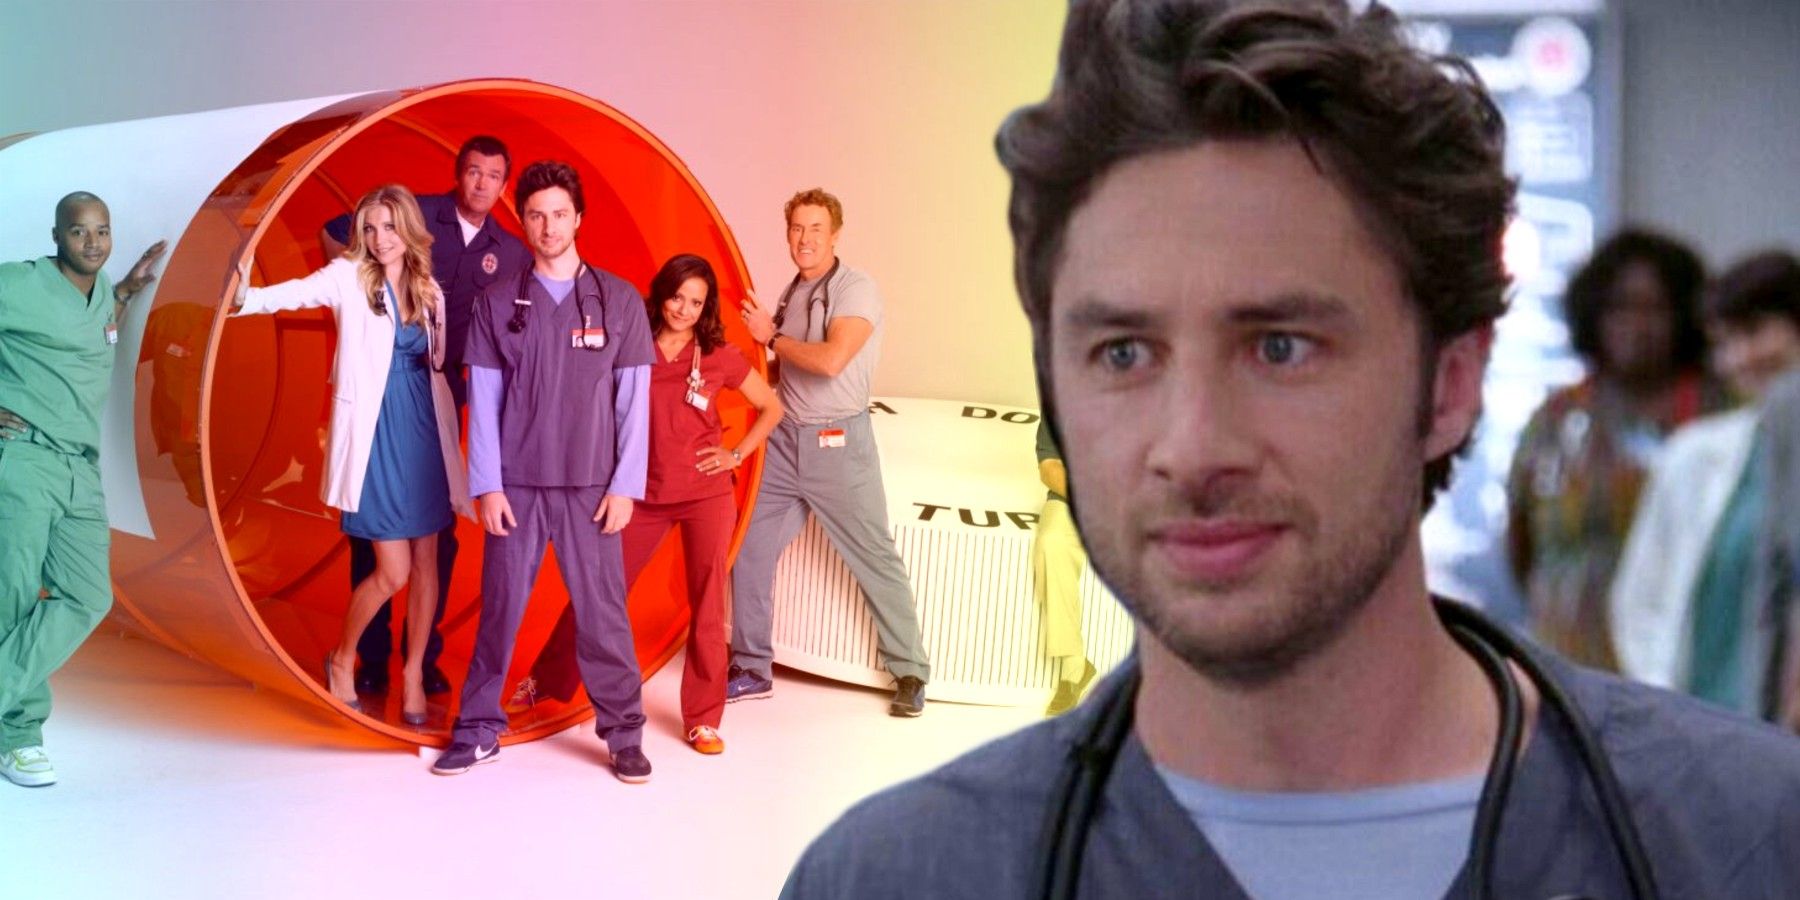 The Scrubs Cast 20 years later.